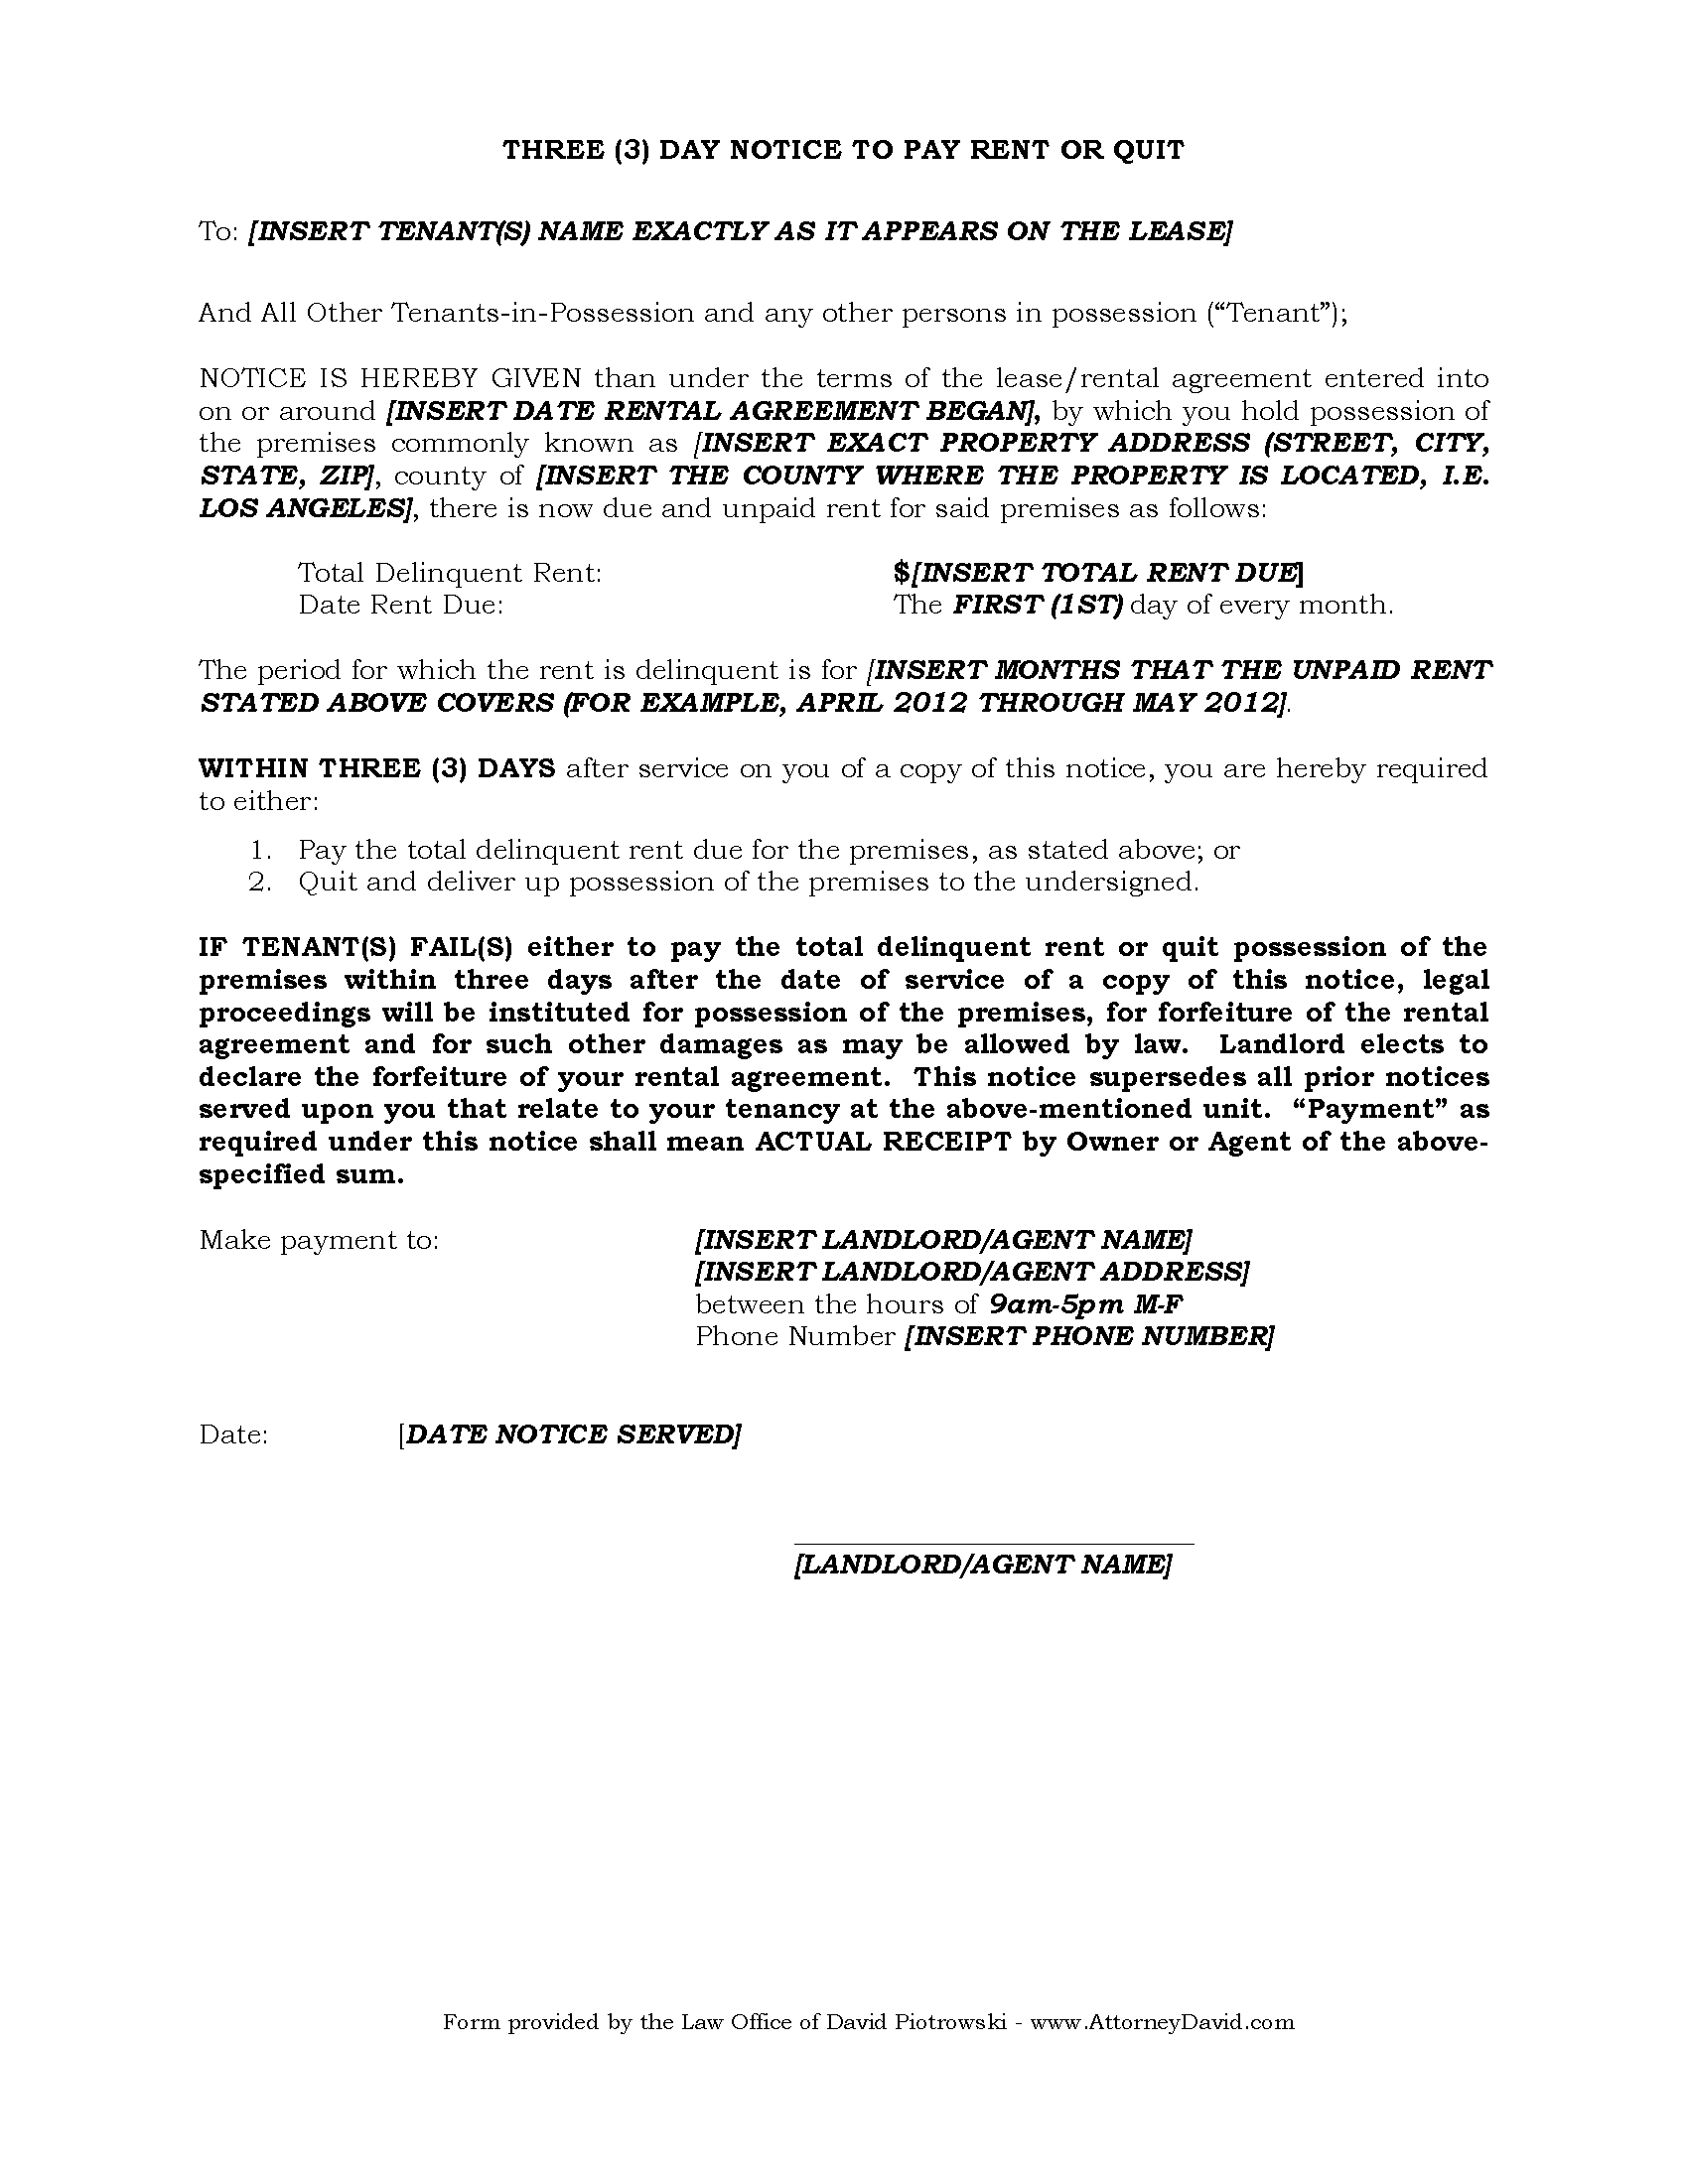 3 Day Eviction Notice For Non-Payment Of Rent In California - Free! - Free Printable 3 Day Eviction Notice